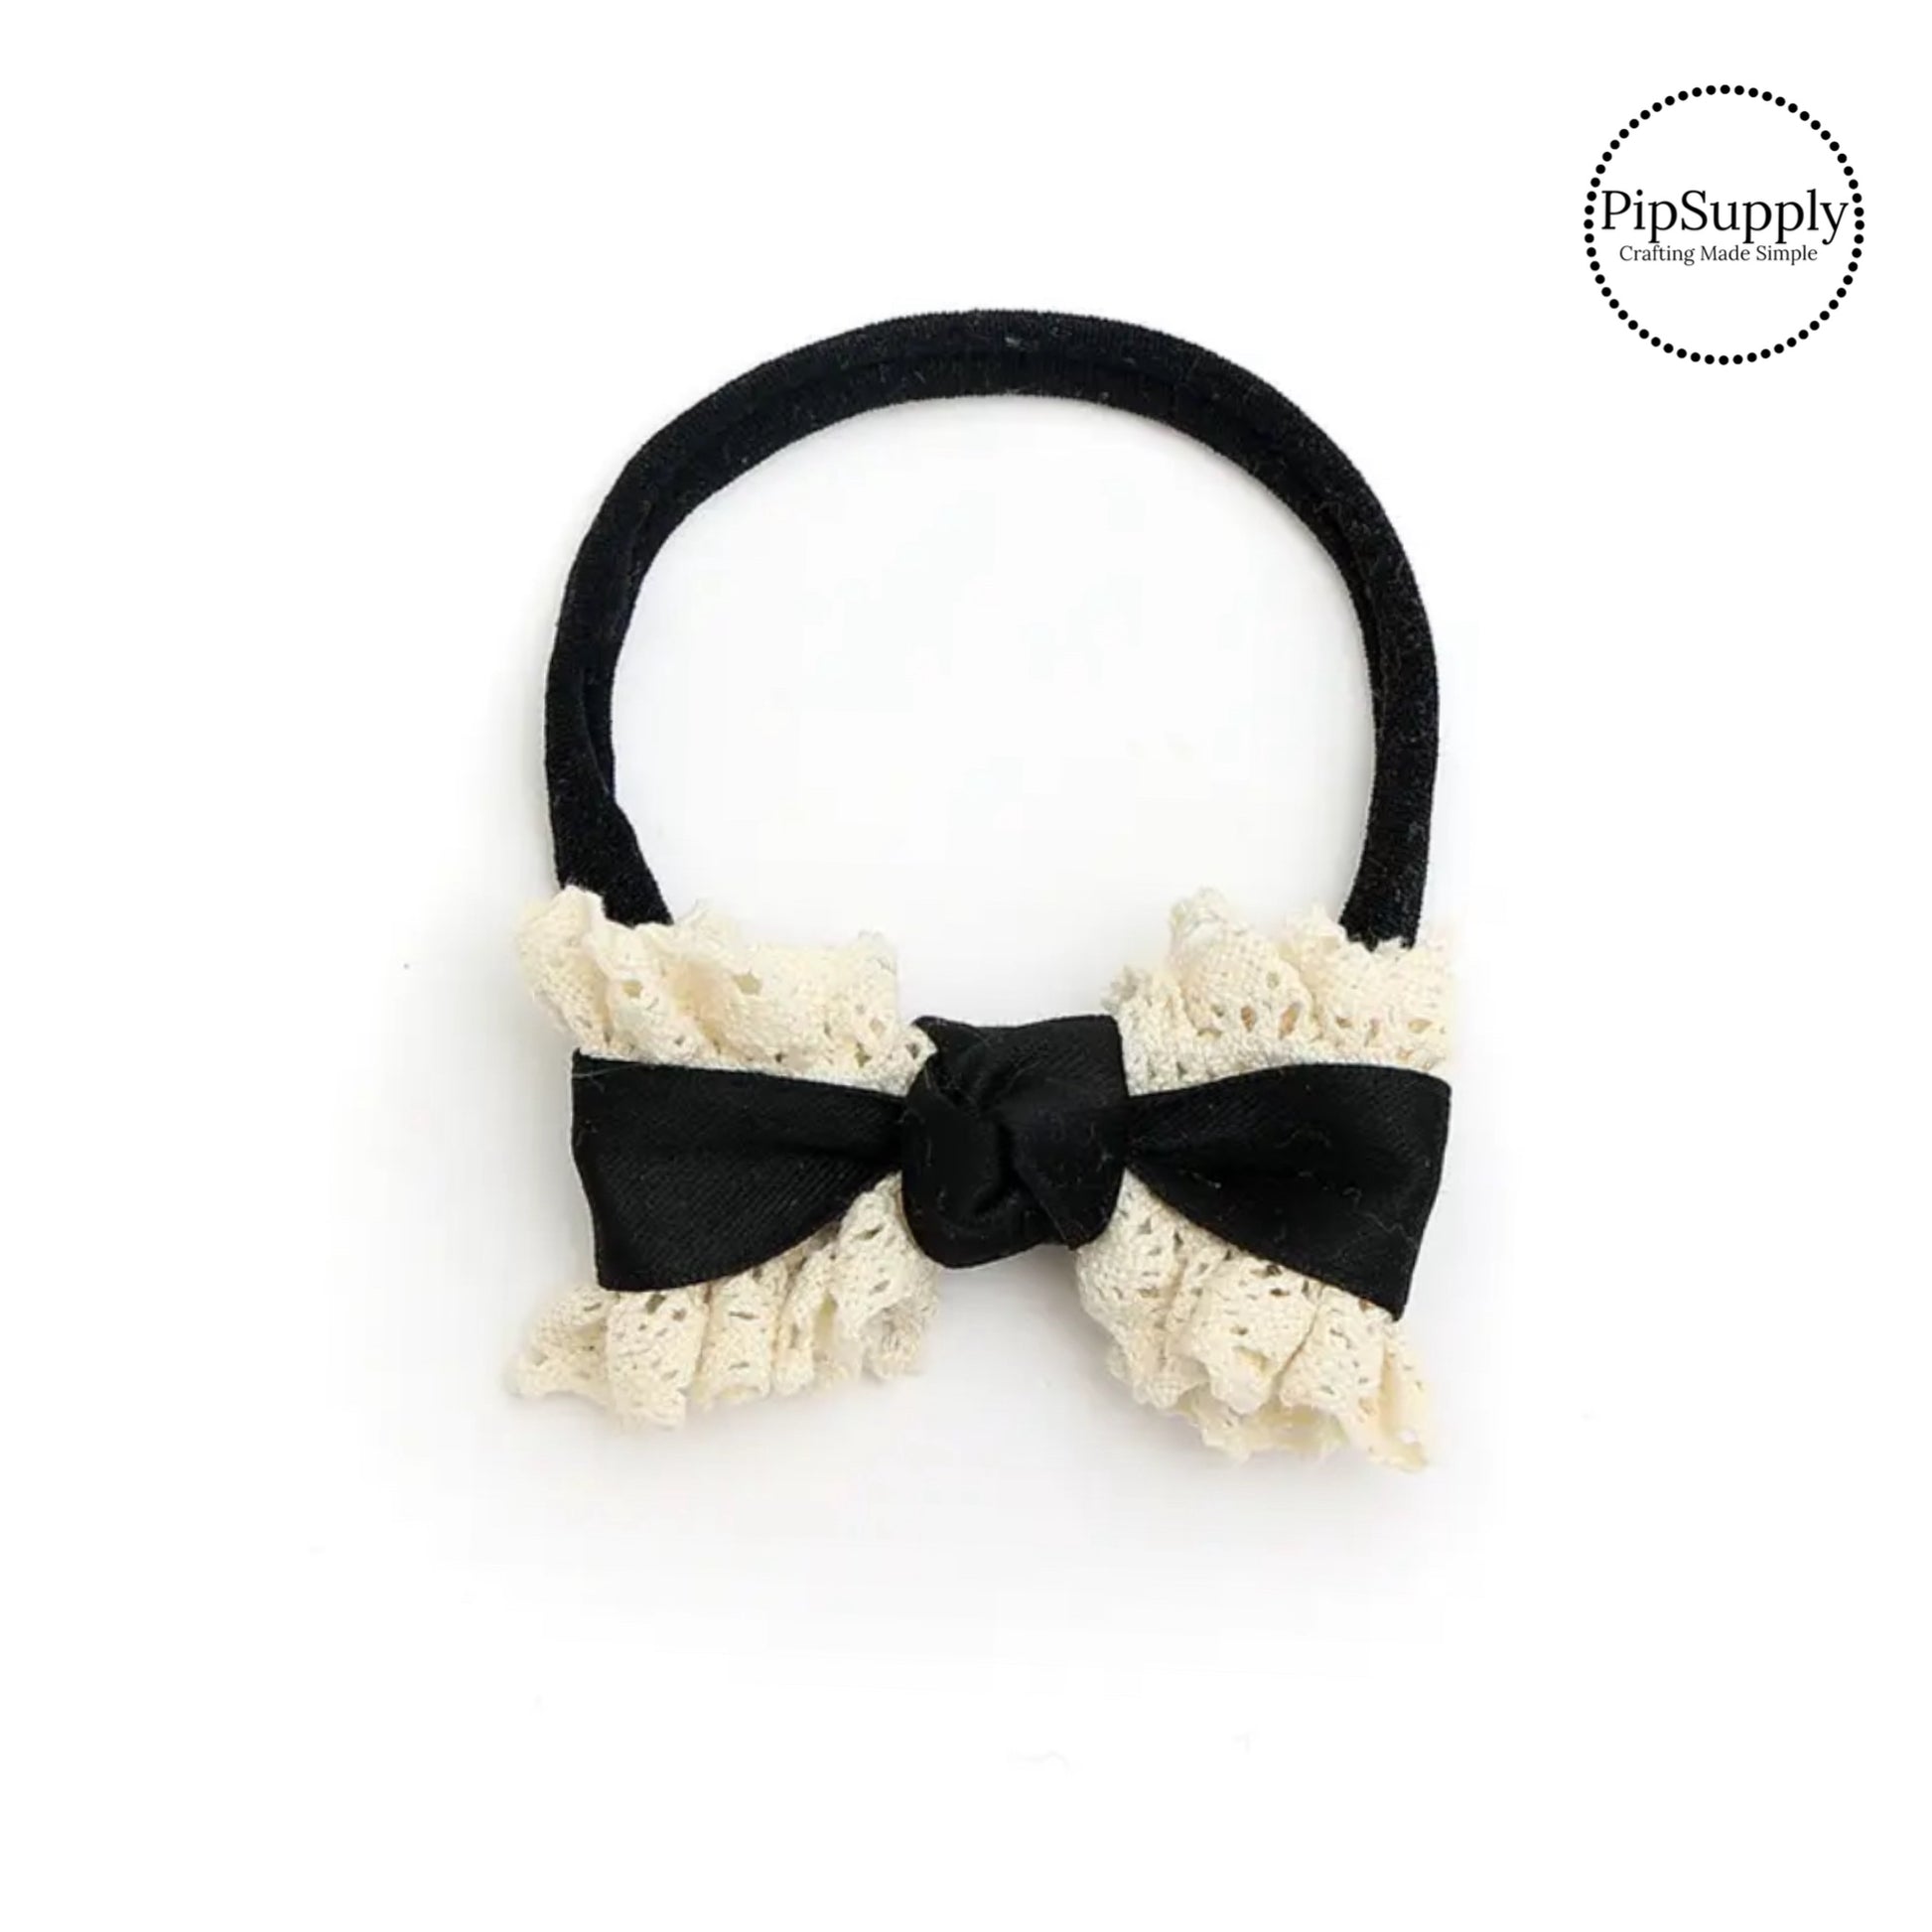 These vintage ruffled lace nylon headbands are a stylish hair accessory and have the on and off ease of a headband. These nylon headbands are a perfect simple and fashionable answer to keeping your hair back! The thin nylon headband has a stretchable fabric that fits babies, kids, and adults. The bow has a lace ruffled border giving it a vintage look.